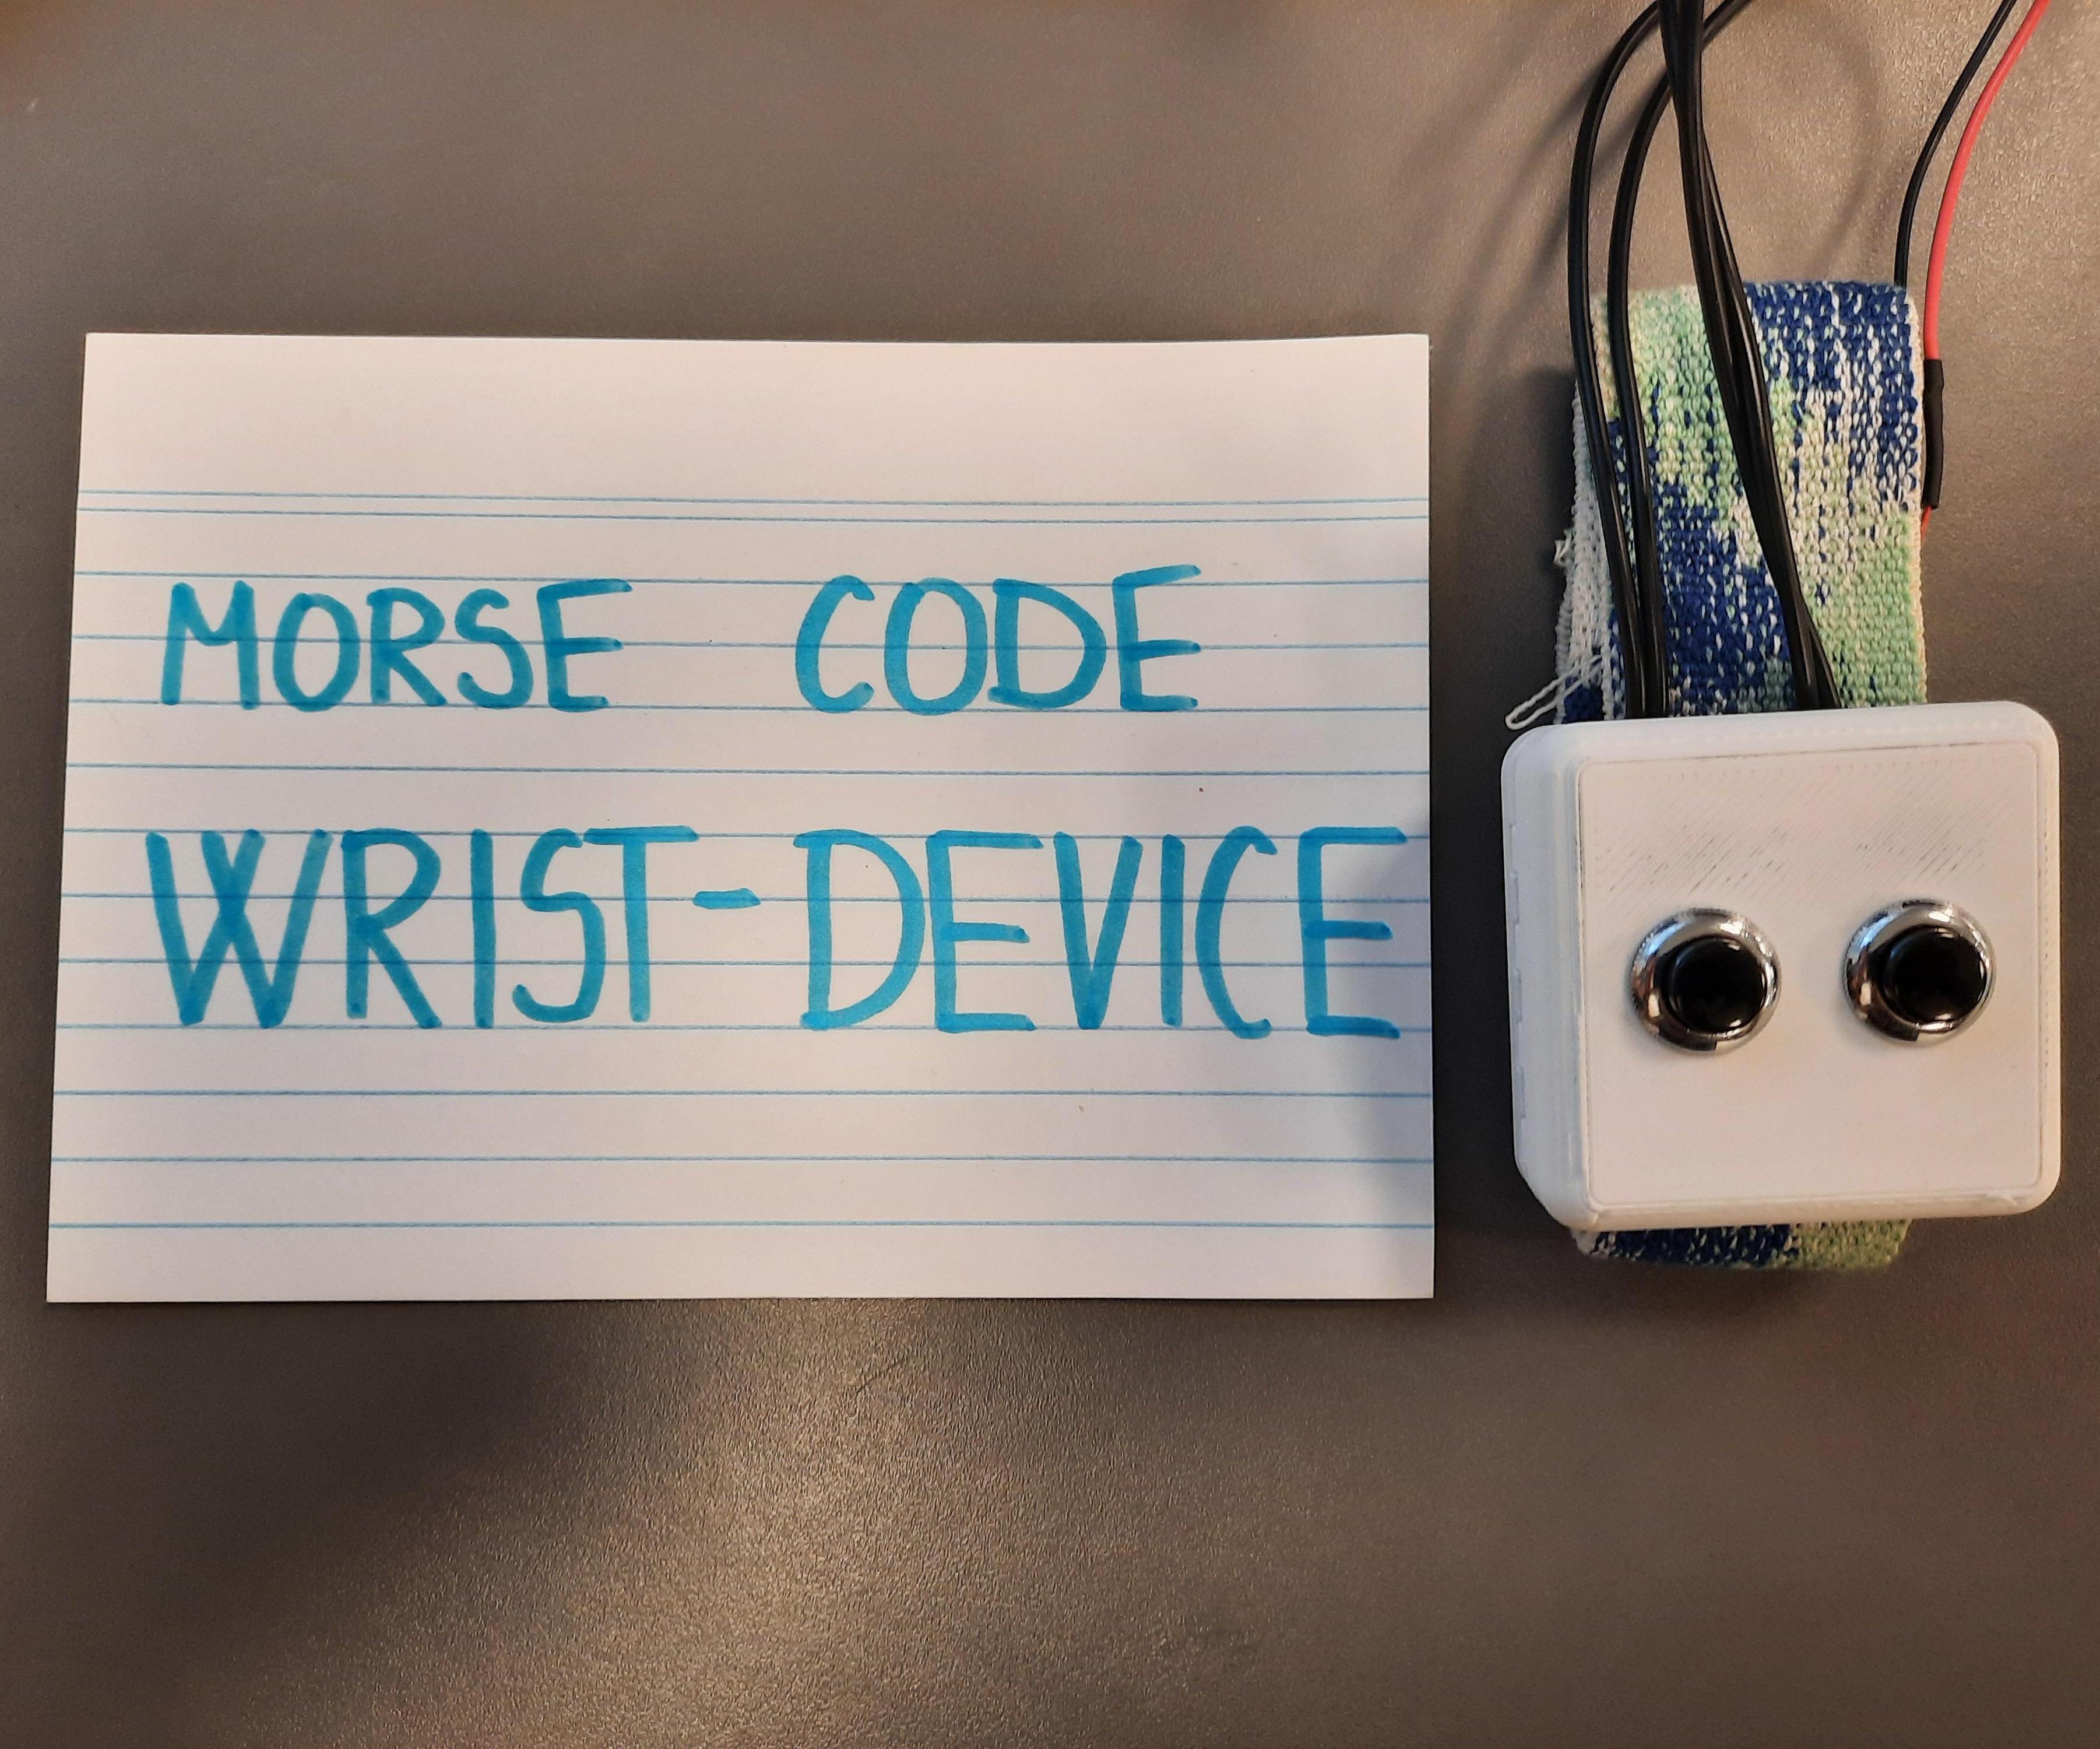 Morse Code Wrist-Device for Texting for Visually Impaired People - Haptic Interfaces Project by Minh Quan Pham and Izabela Trepacova